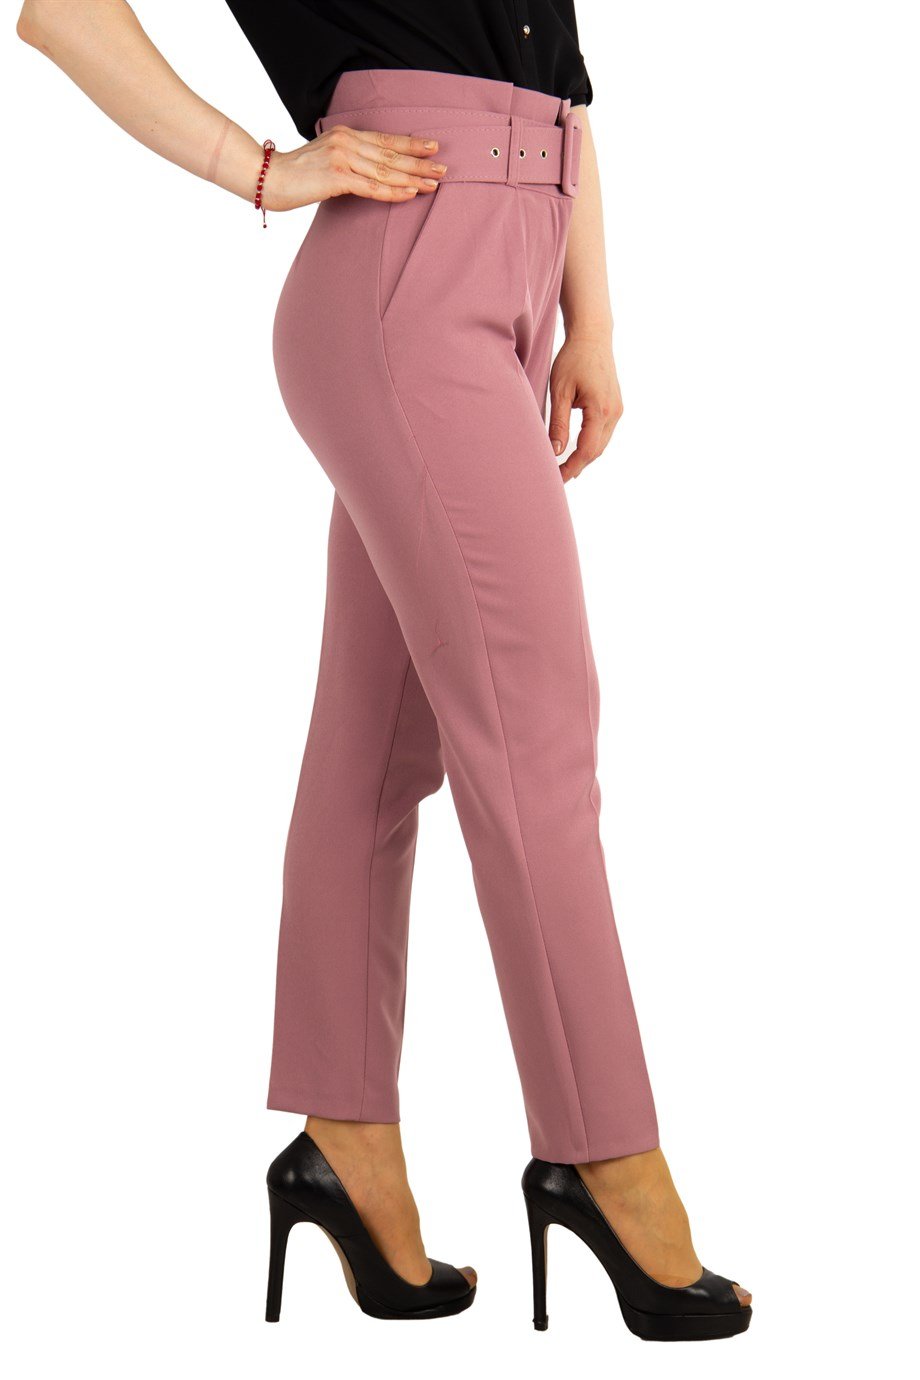 Trousers With Matching Belt Casual Formal Office Pants For Ladies - Dusty  Rose - Wholesale Womens Clothing Vendors For Boutiques